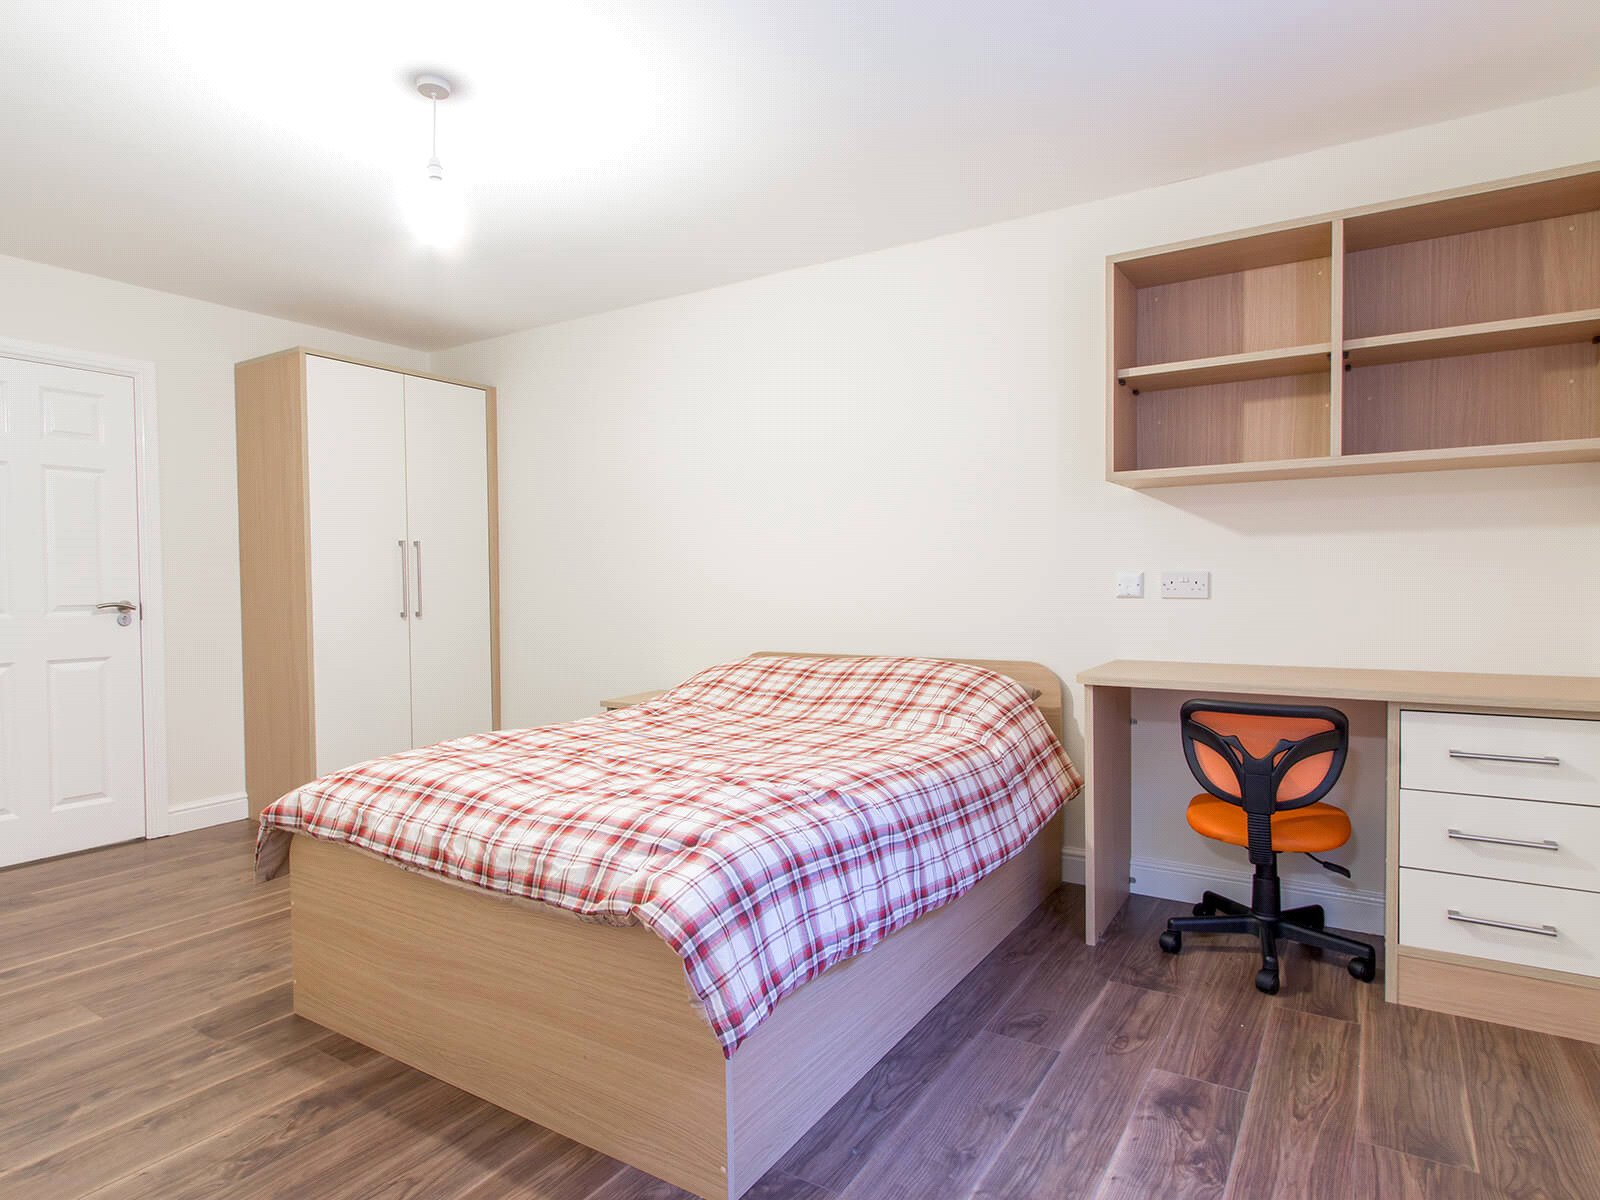 3 bed apartment for rent in Leeds. From YPP - Leeds